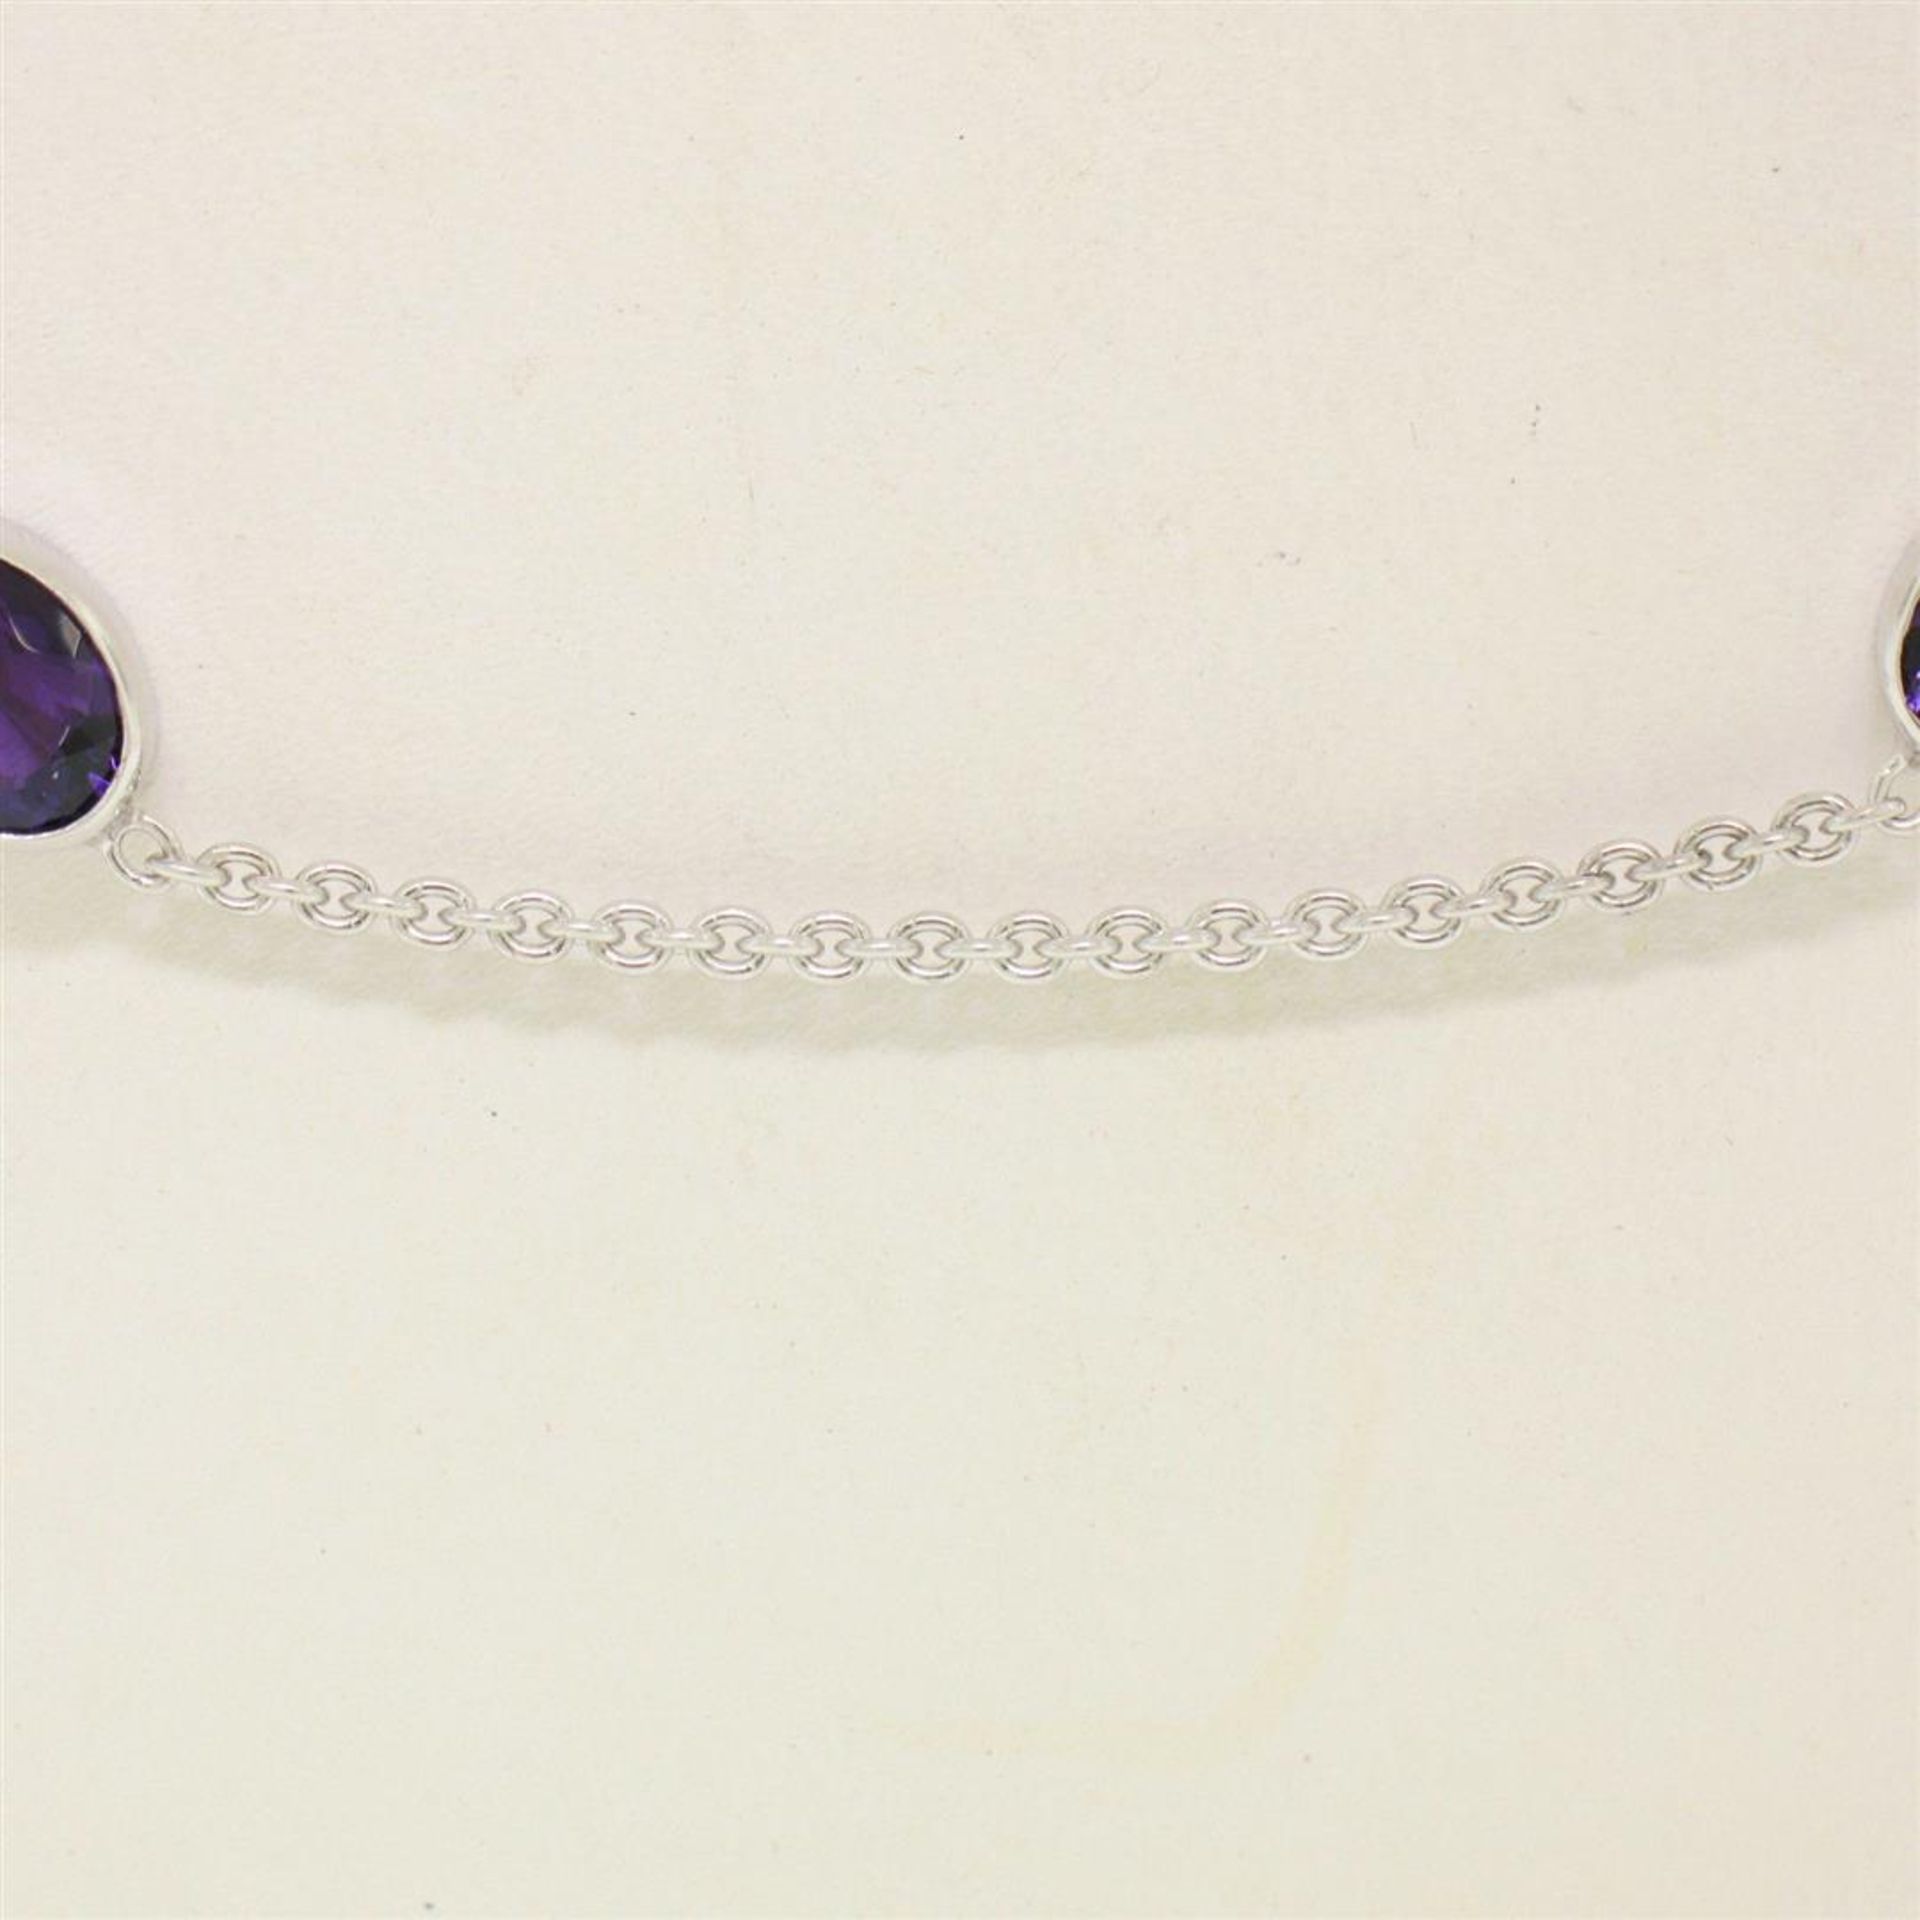 14k White Gold 8 ctw 8 Station Amethyst by the Yard 20" Cable Link Chain Necklac - Image 3 of 7